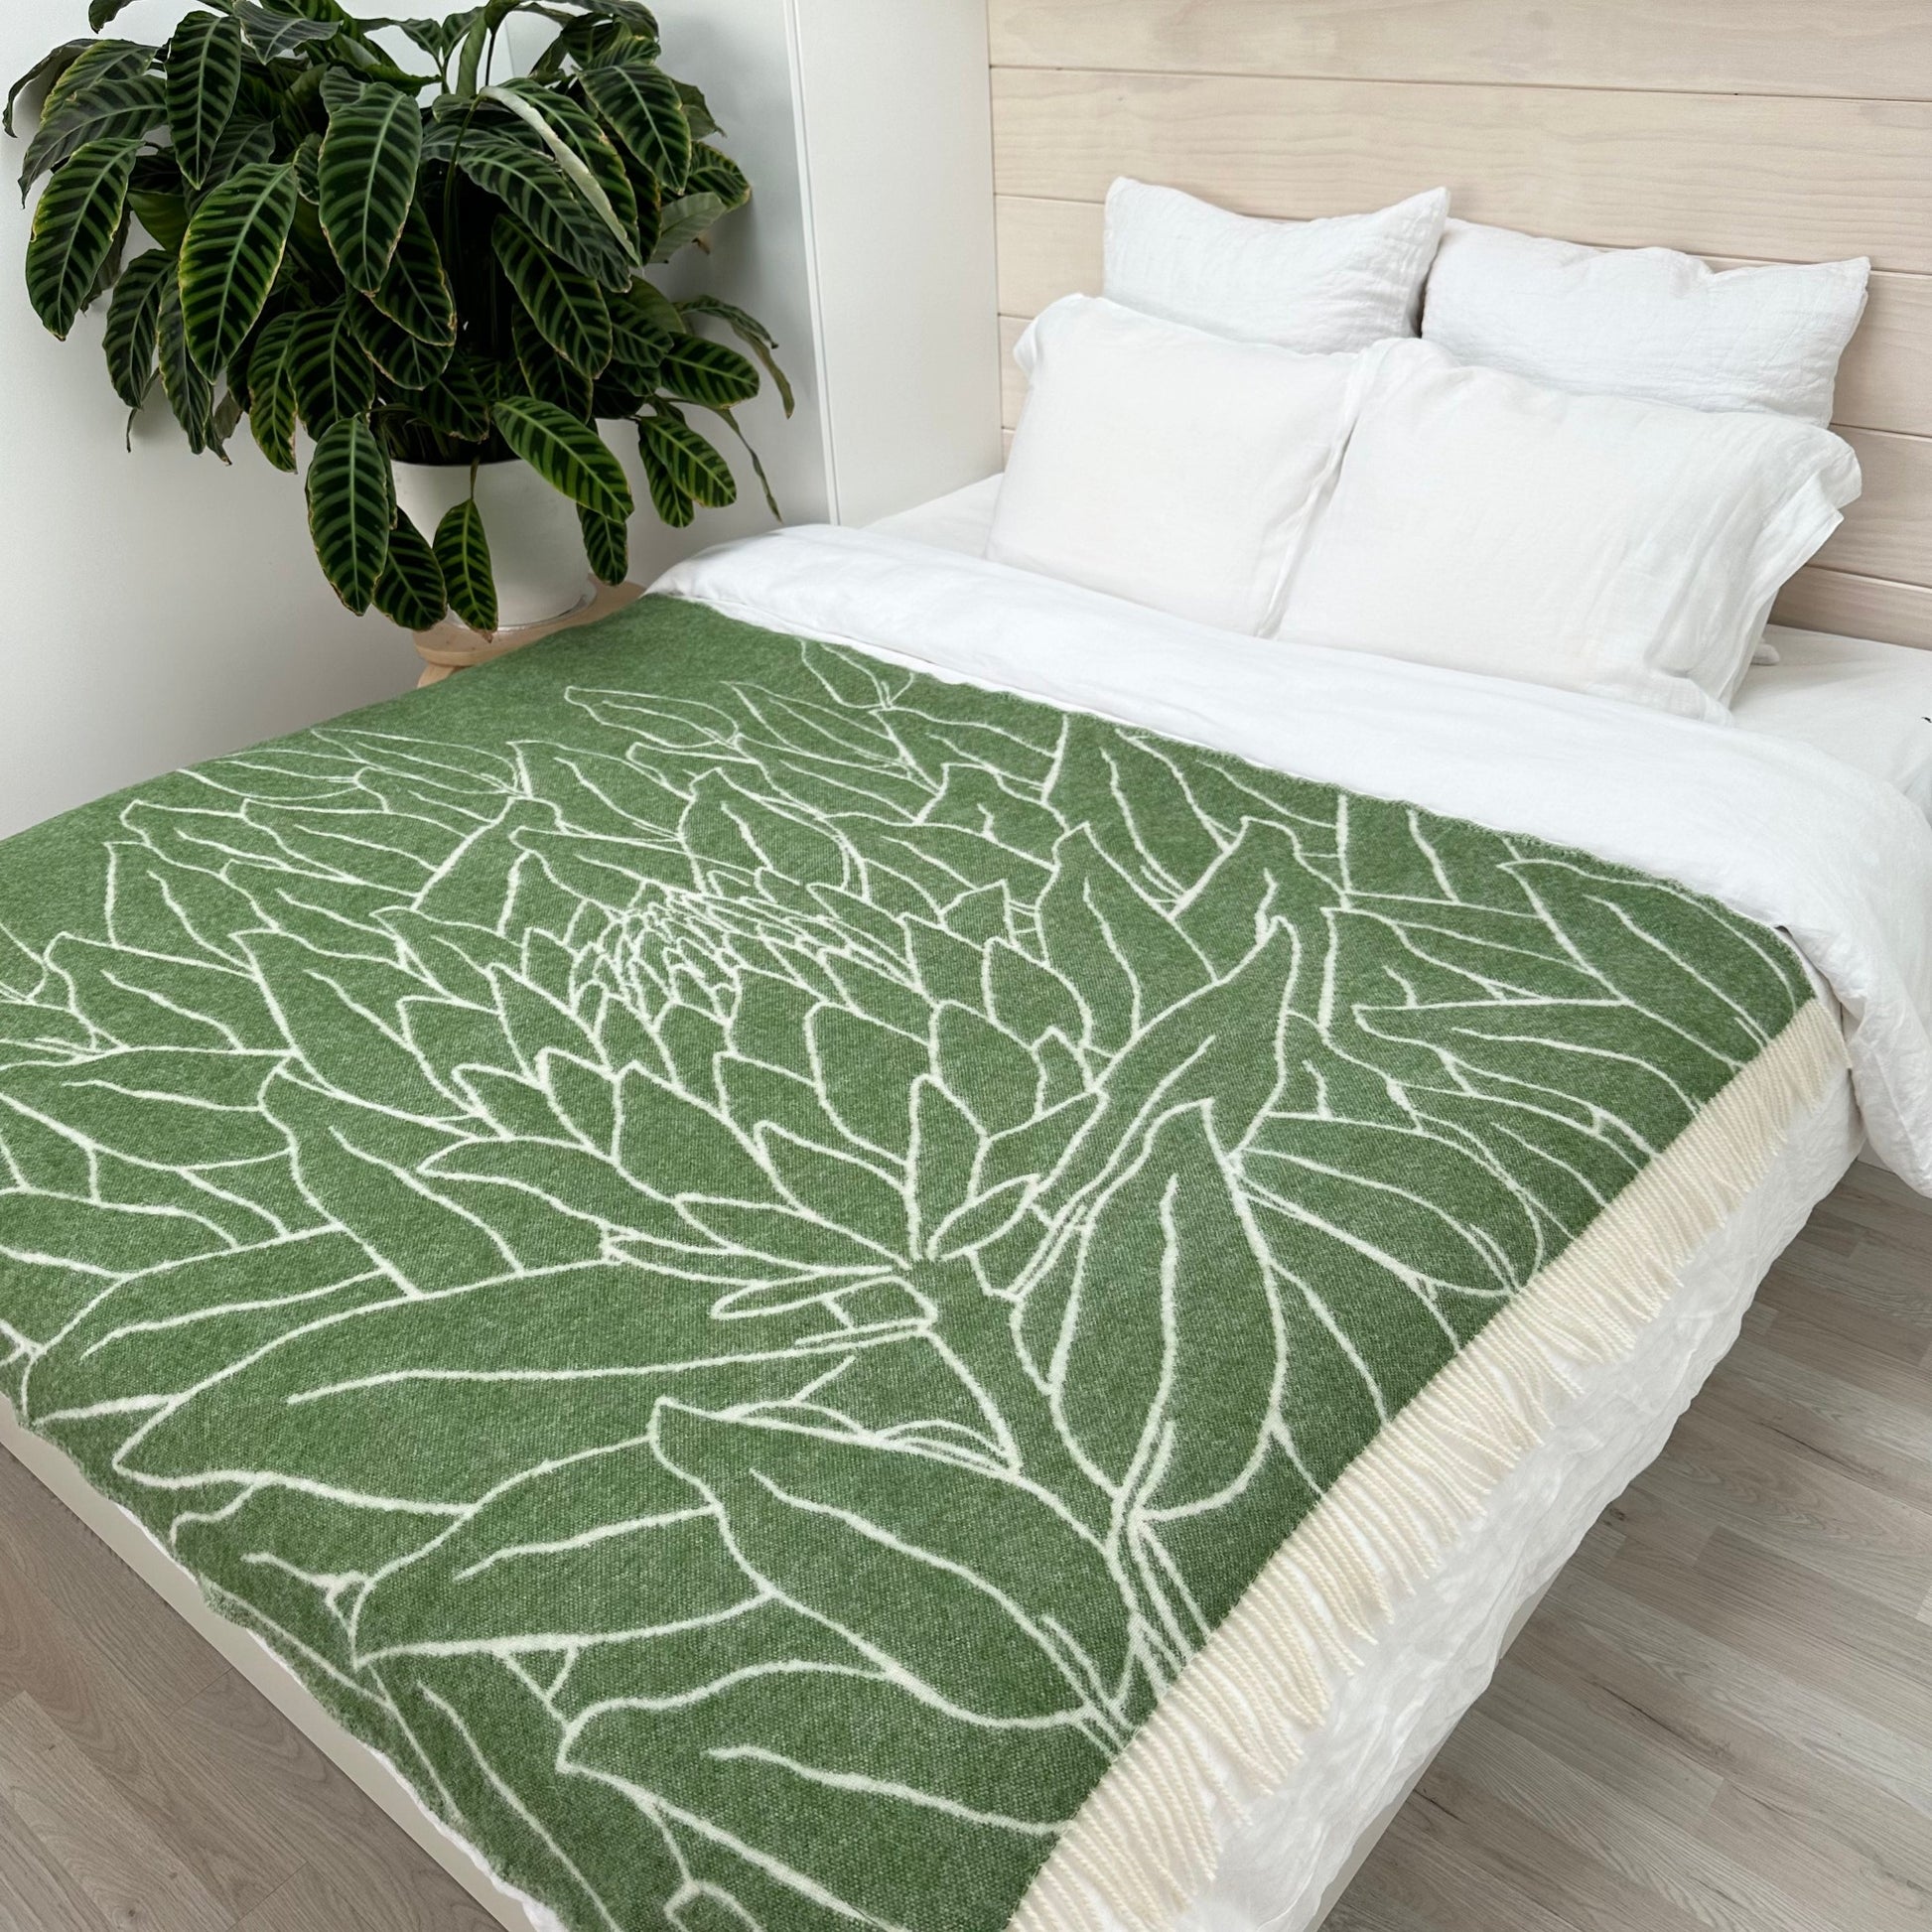 NORDIC CHILL Protea 100% Wool Throw 130x170cm, Forest Green (6797448249409)